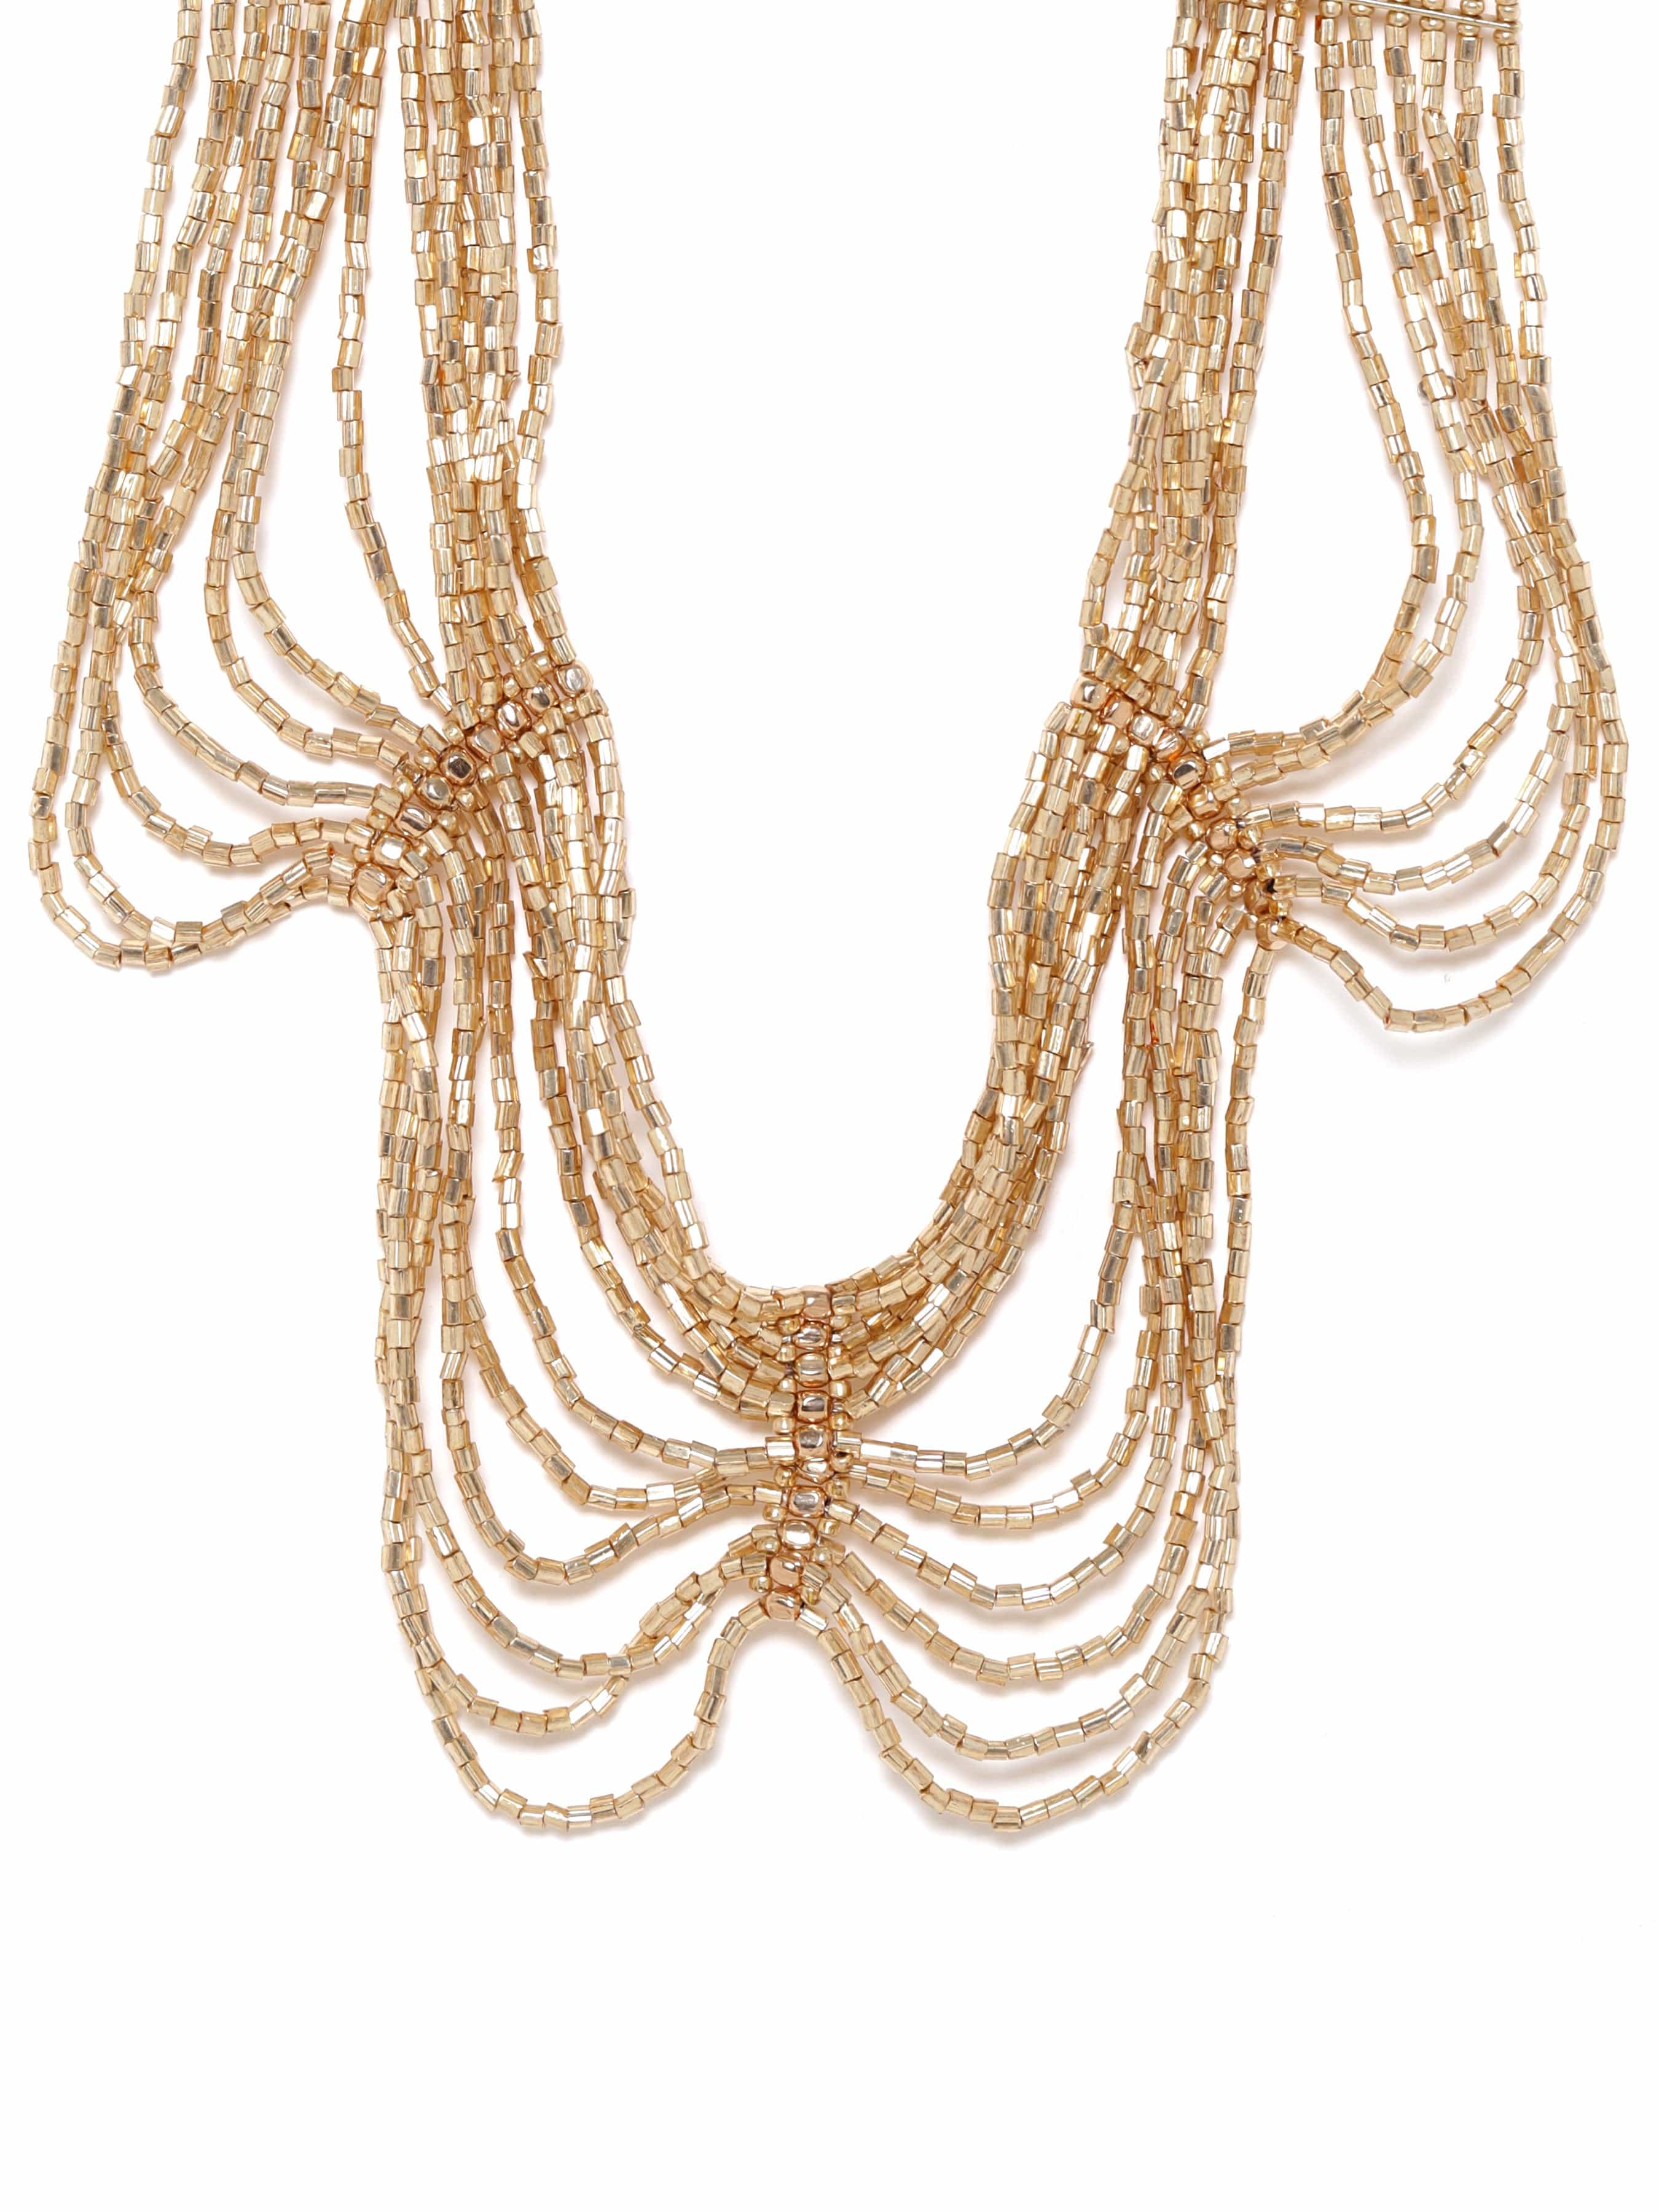 Buy PRITA Multilayer Beaded Silver and Gold Threaded Necklace at Amazon.in